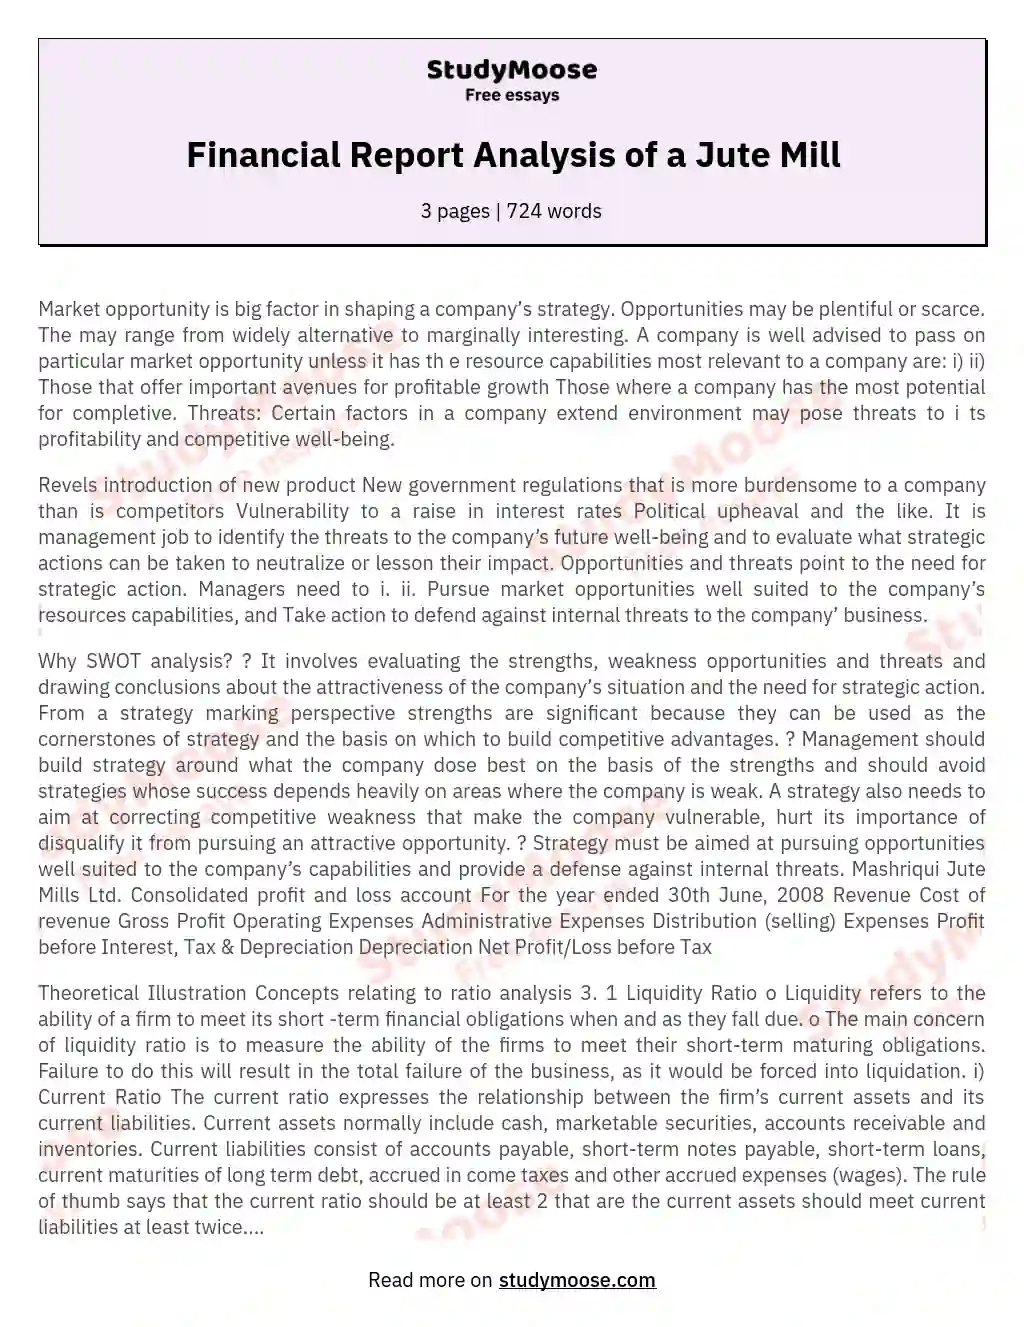 Financial Report Analysis of a Jute Mill